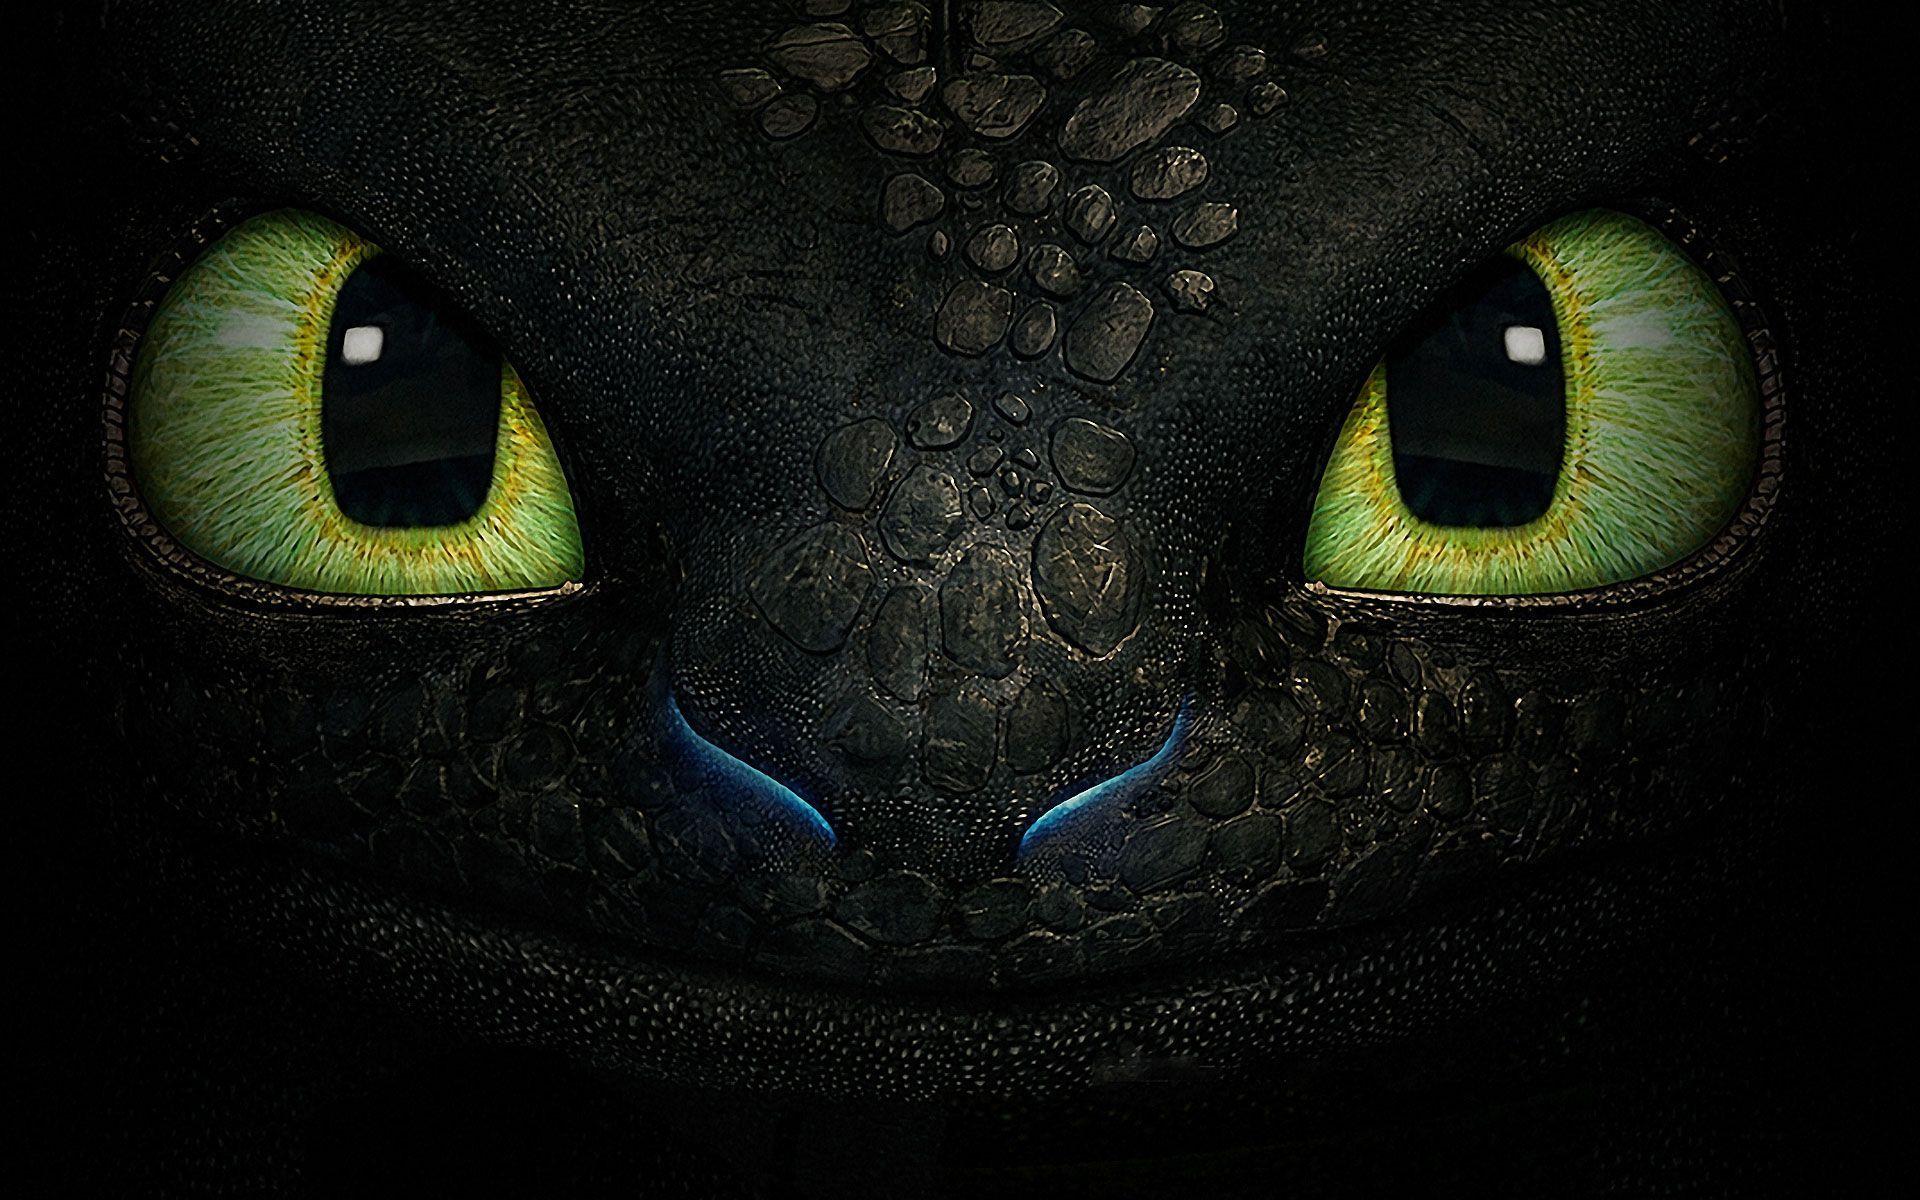 How to Train Your Dragon 2 Wallpaper HD Collection. How train